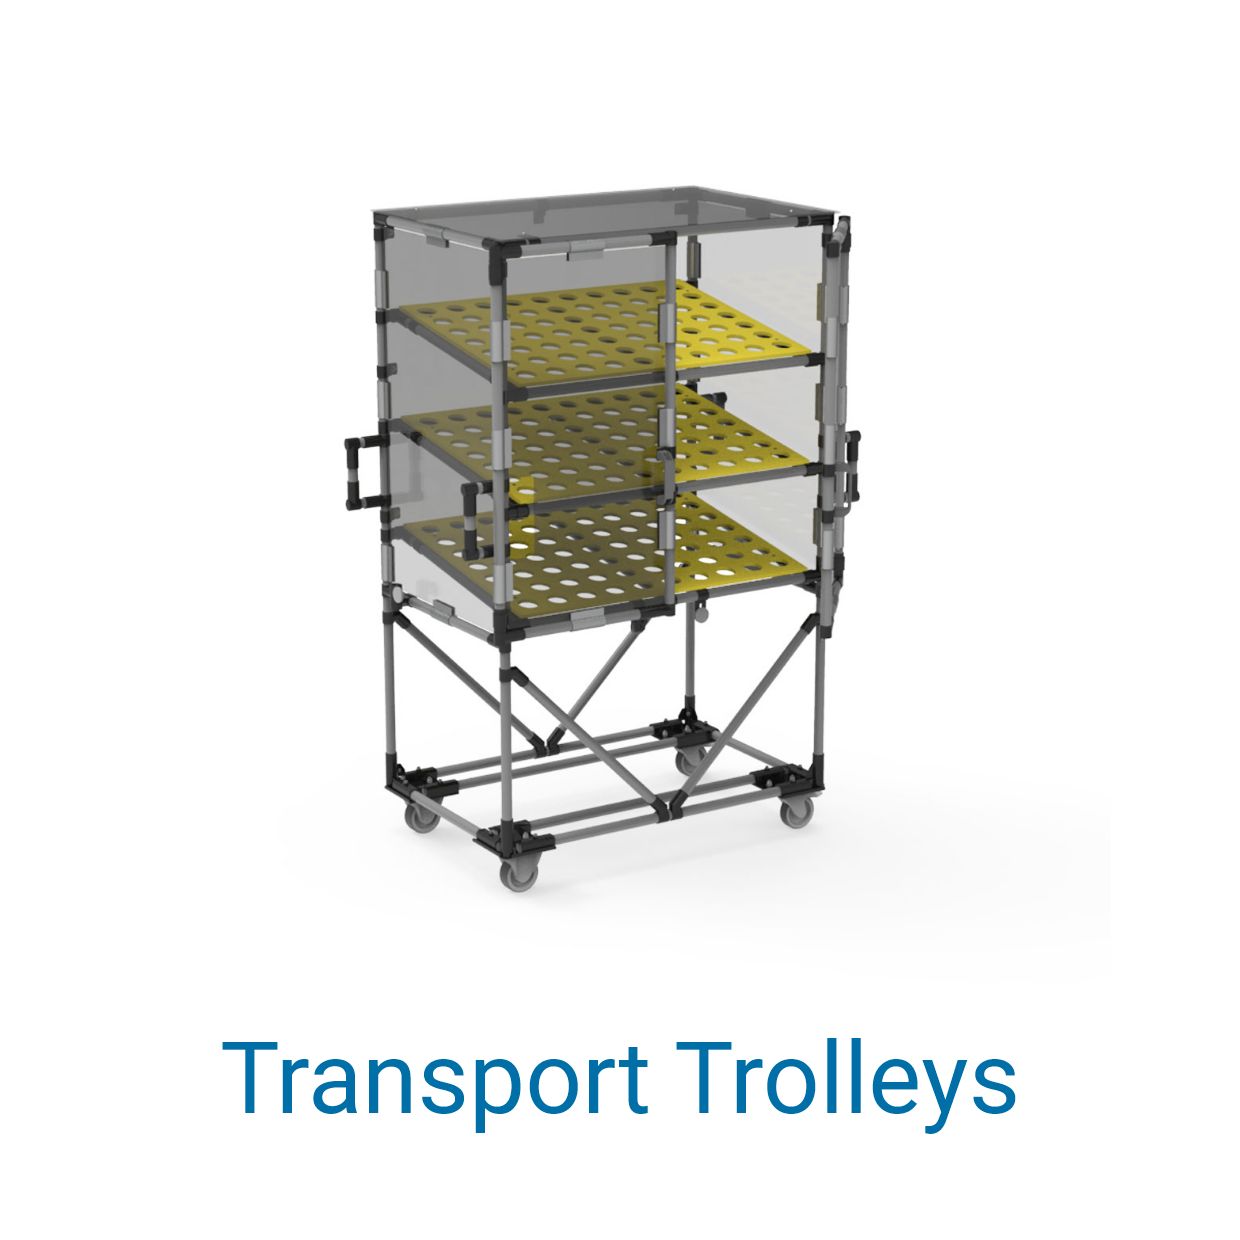 Rendering of a transport trolley from BeeWaTec 